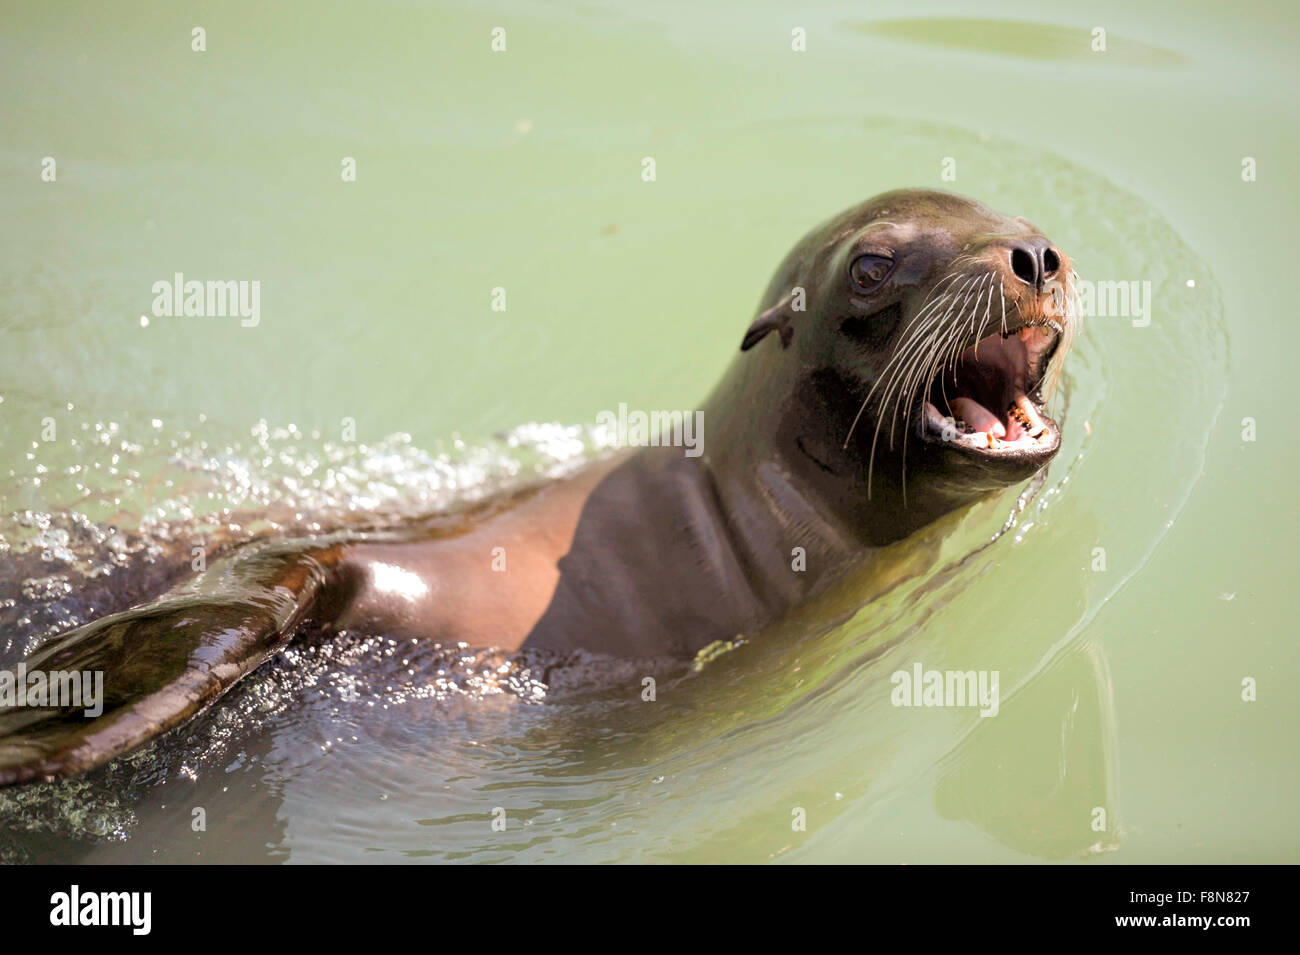 Seal lion in water swimming Stock Photo